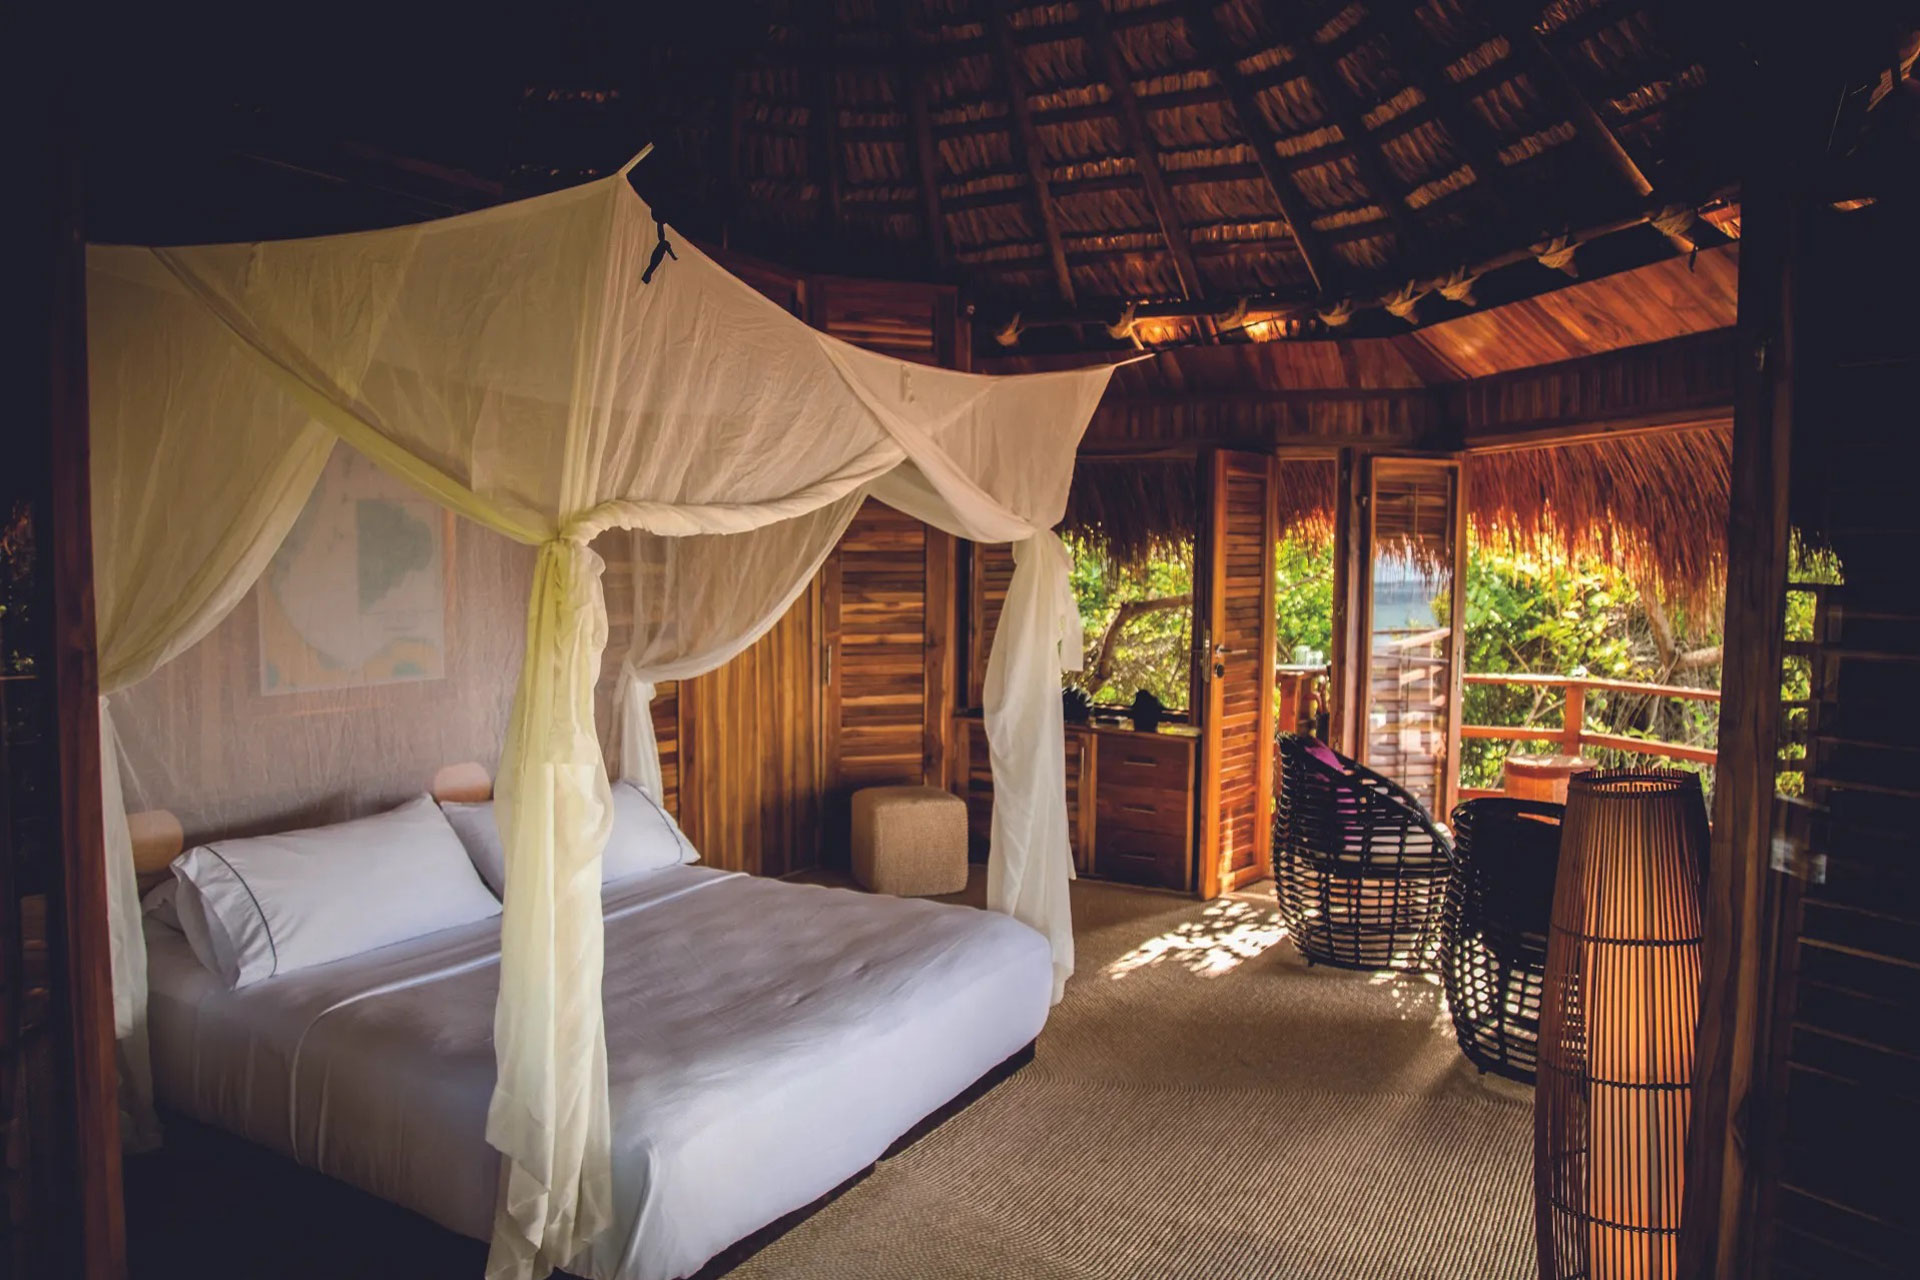 Treetop hotel room with four poster bed.